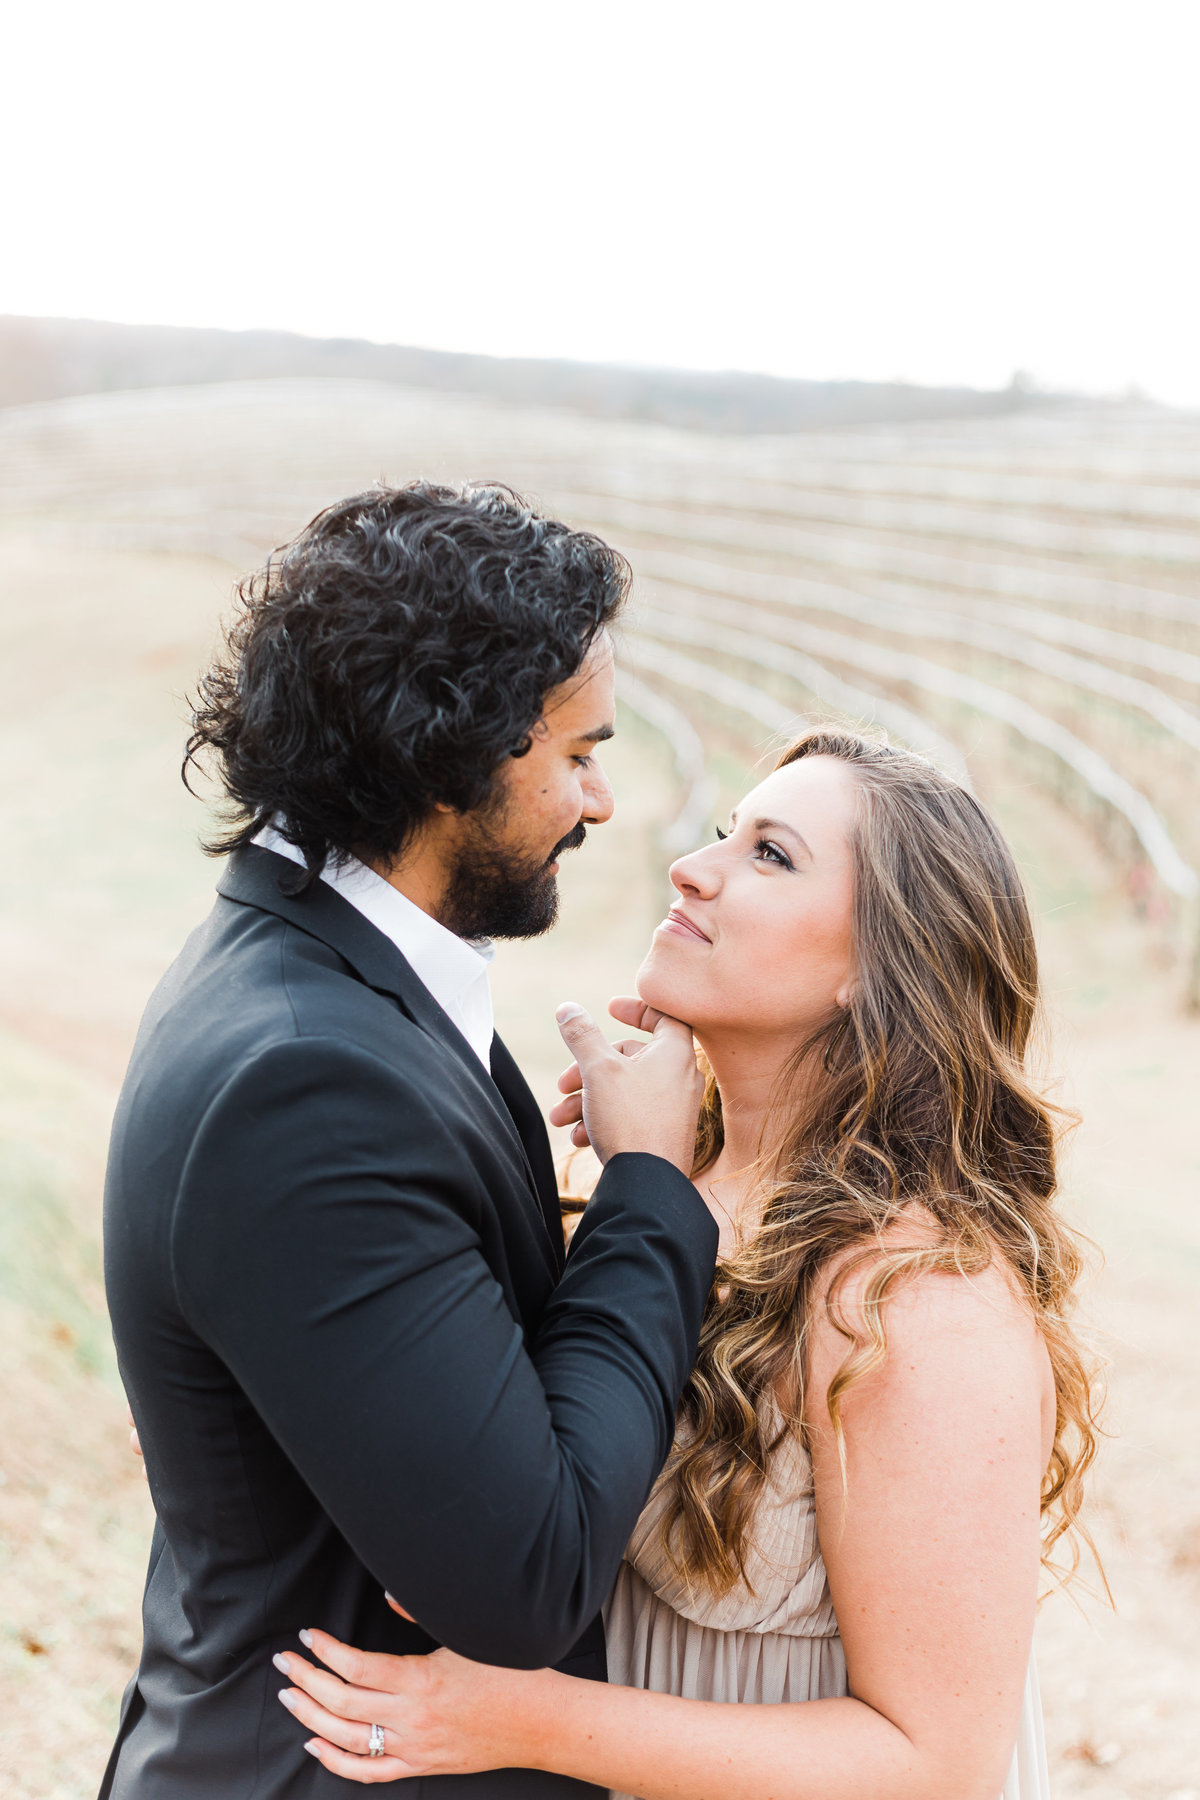 Motaluce Winery, Gainesville, GA Couple Engagement Anniversary Photography Session by Renee Jael-7